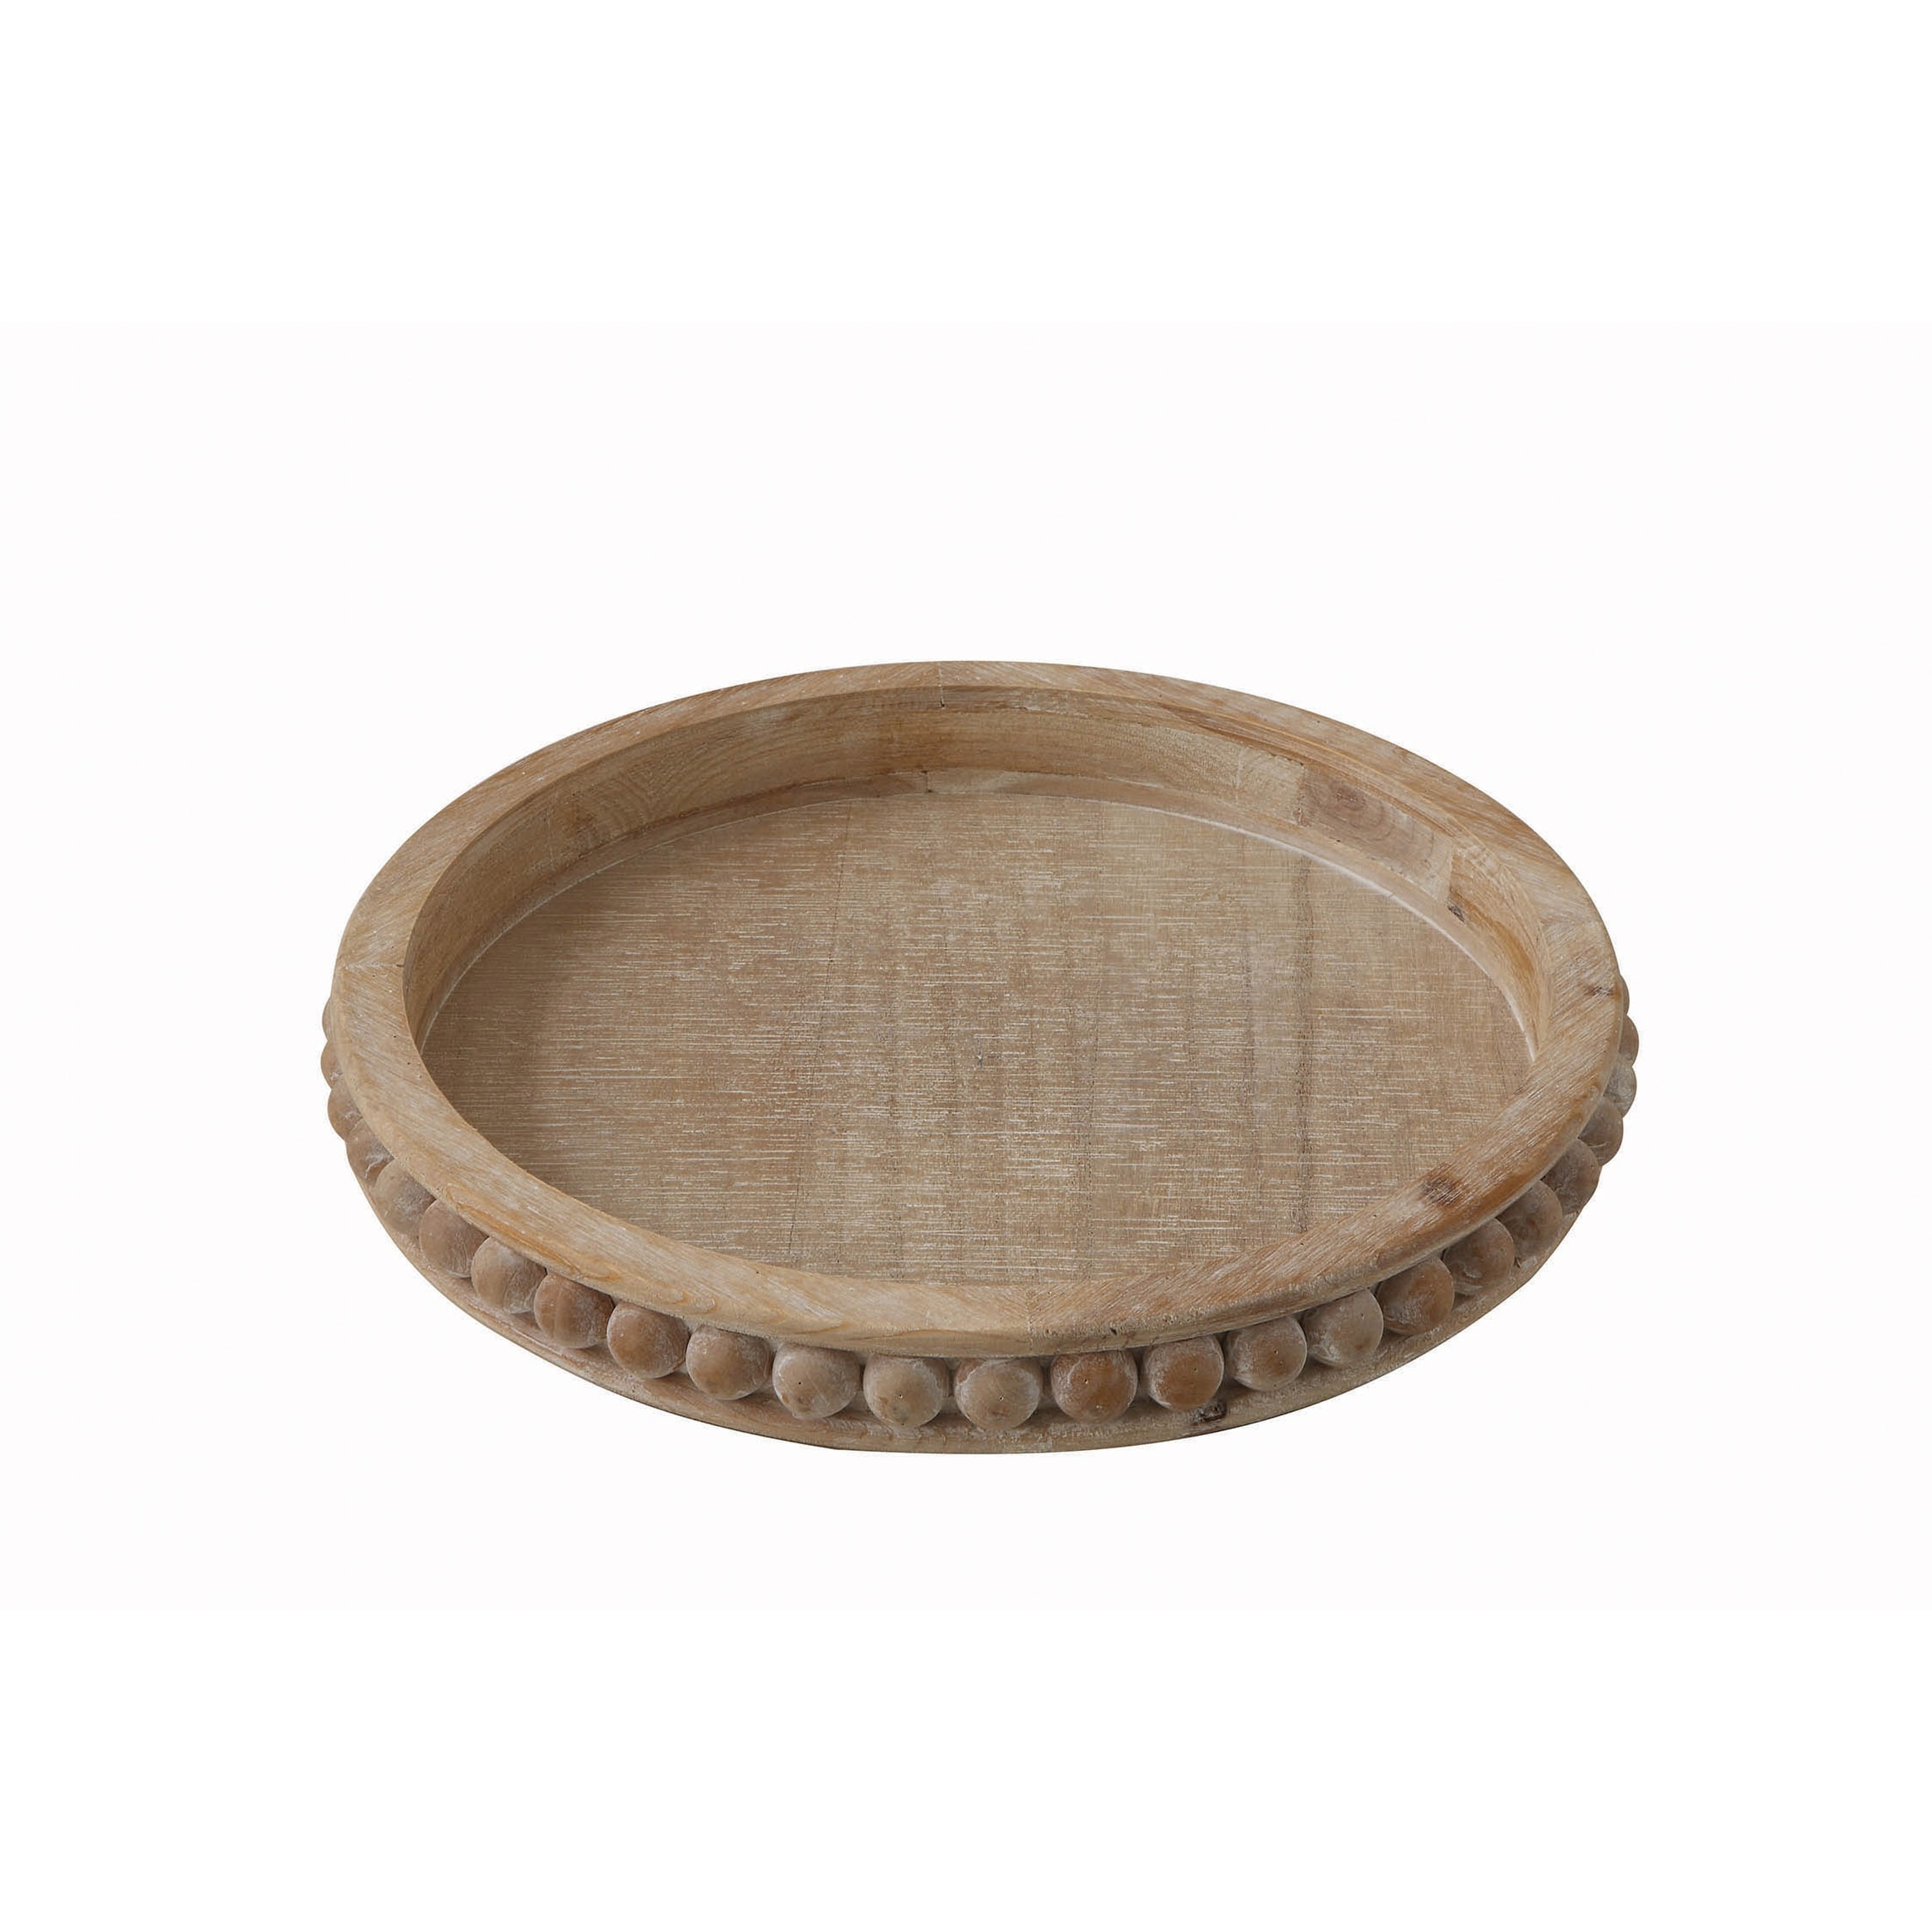 Round Decorative Wood Tray - On Sale - Bed Bath & Beyond - 33786743